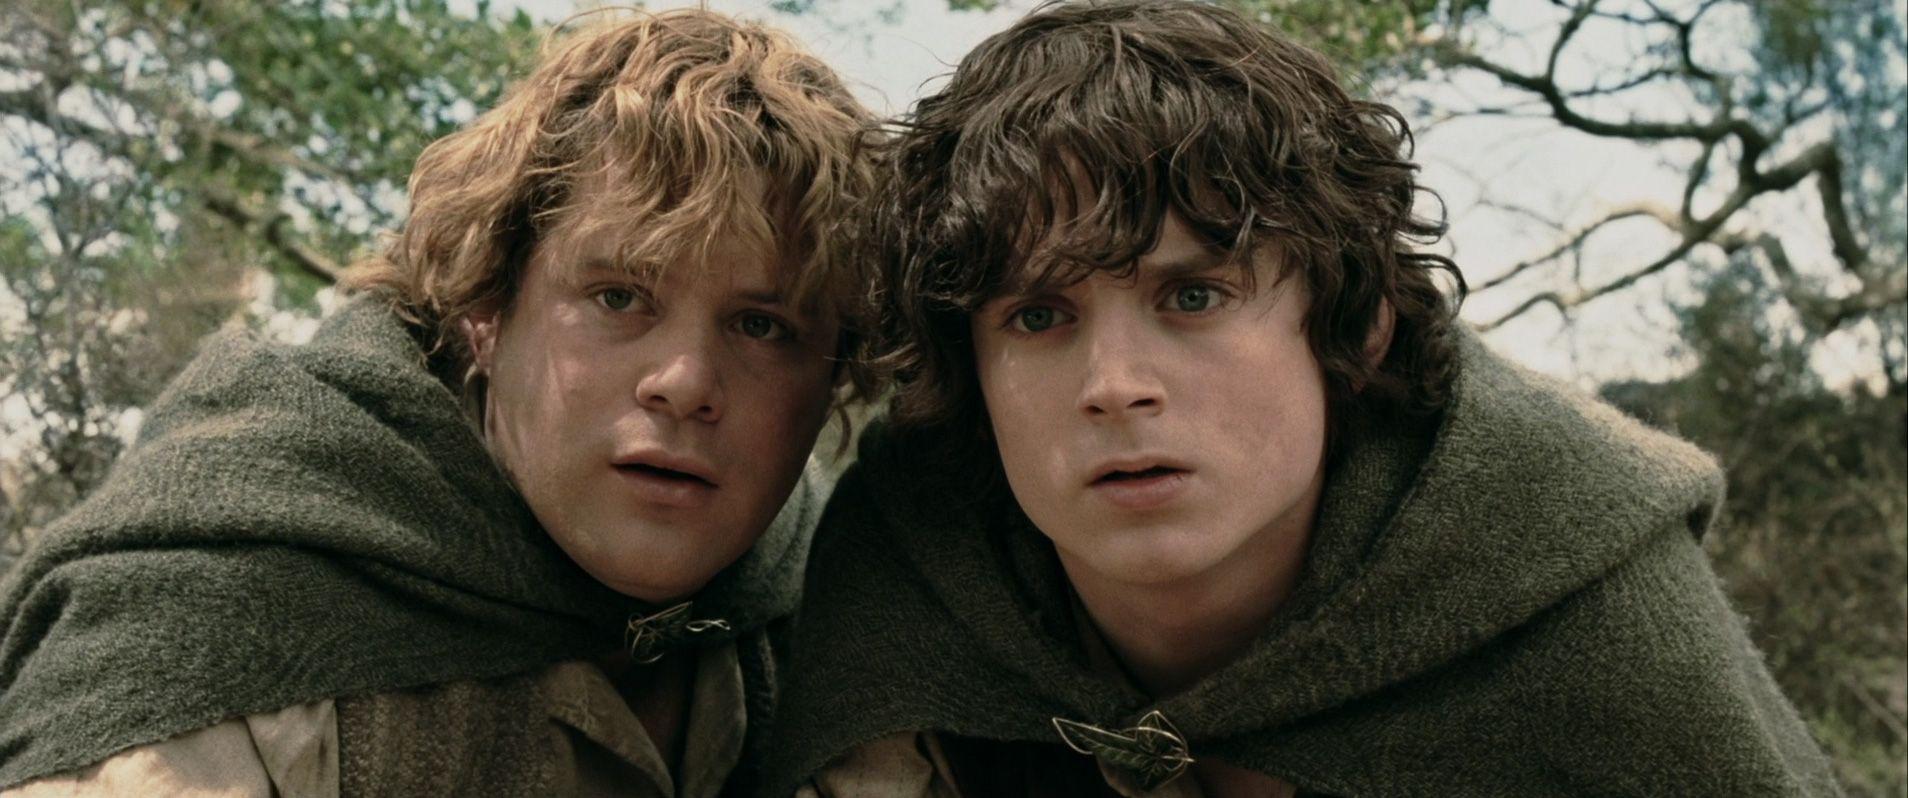 Frodo & Sam image LOTR: The Two Towers HD wallpaper and background